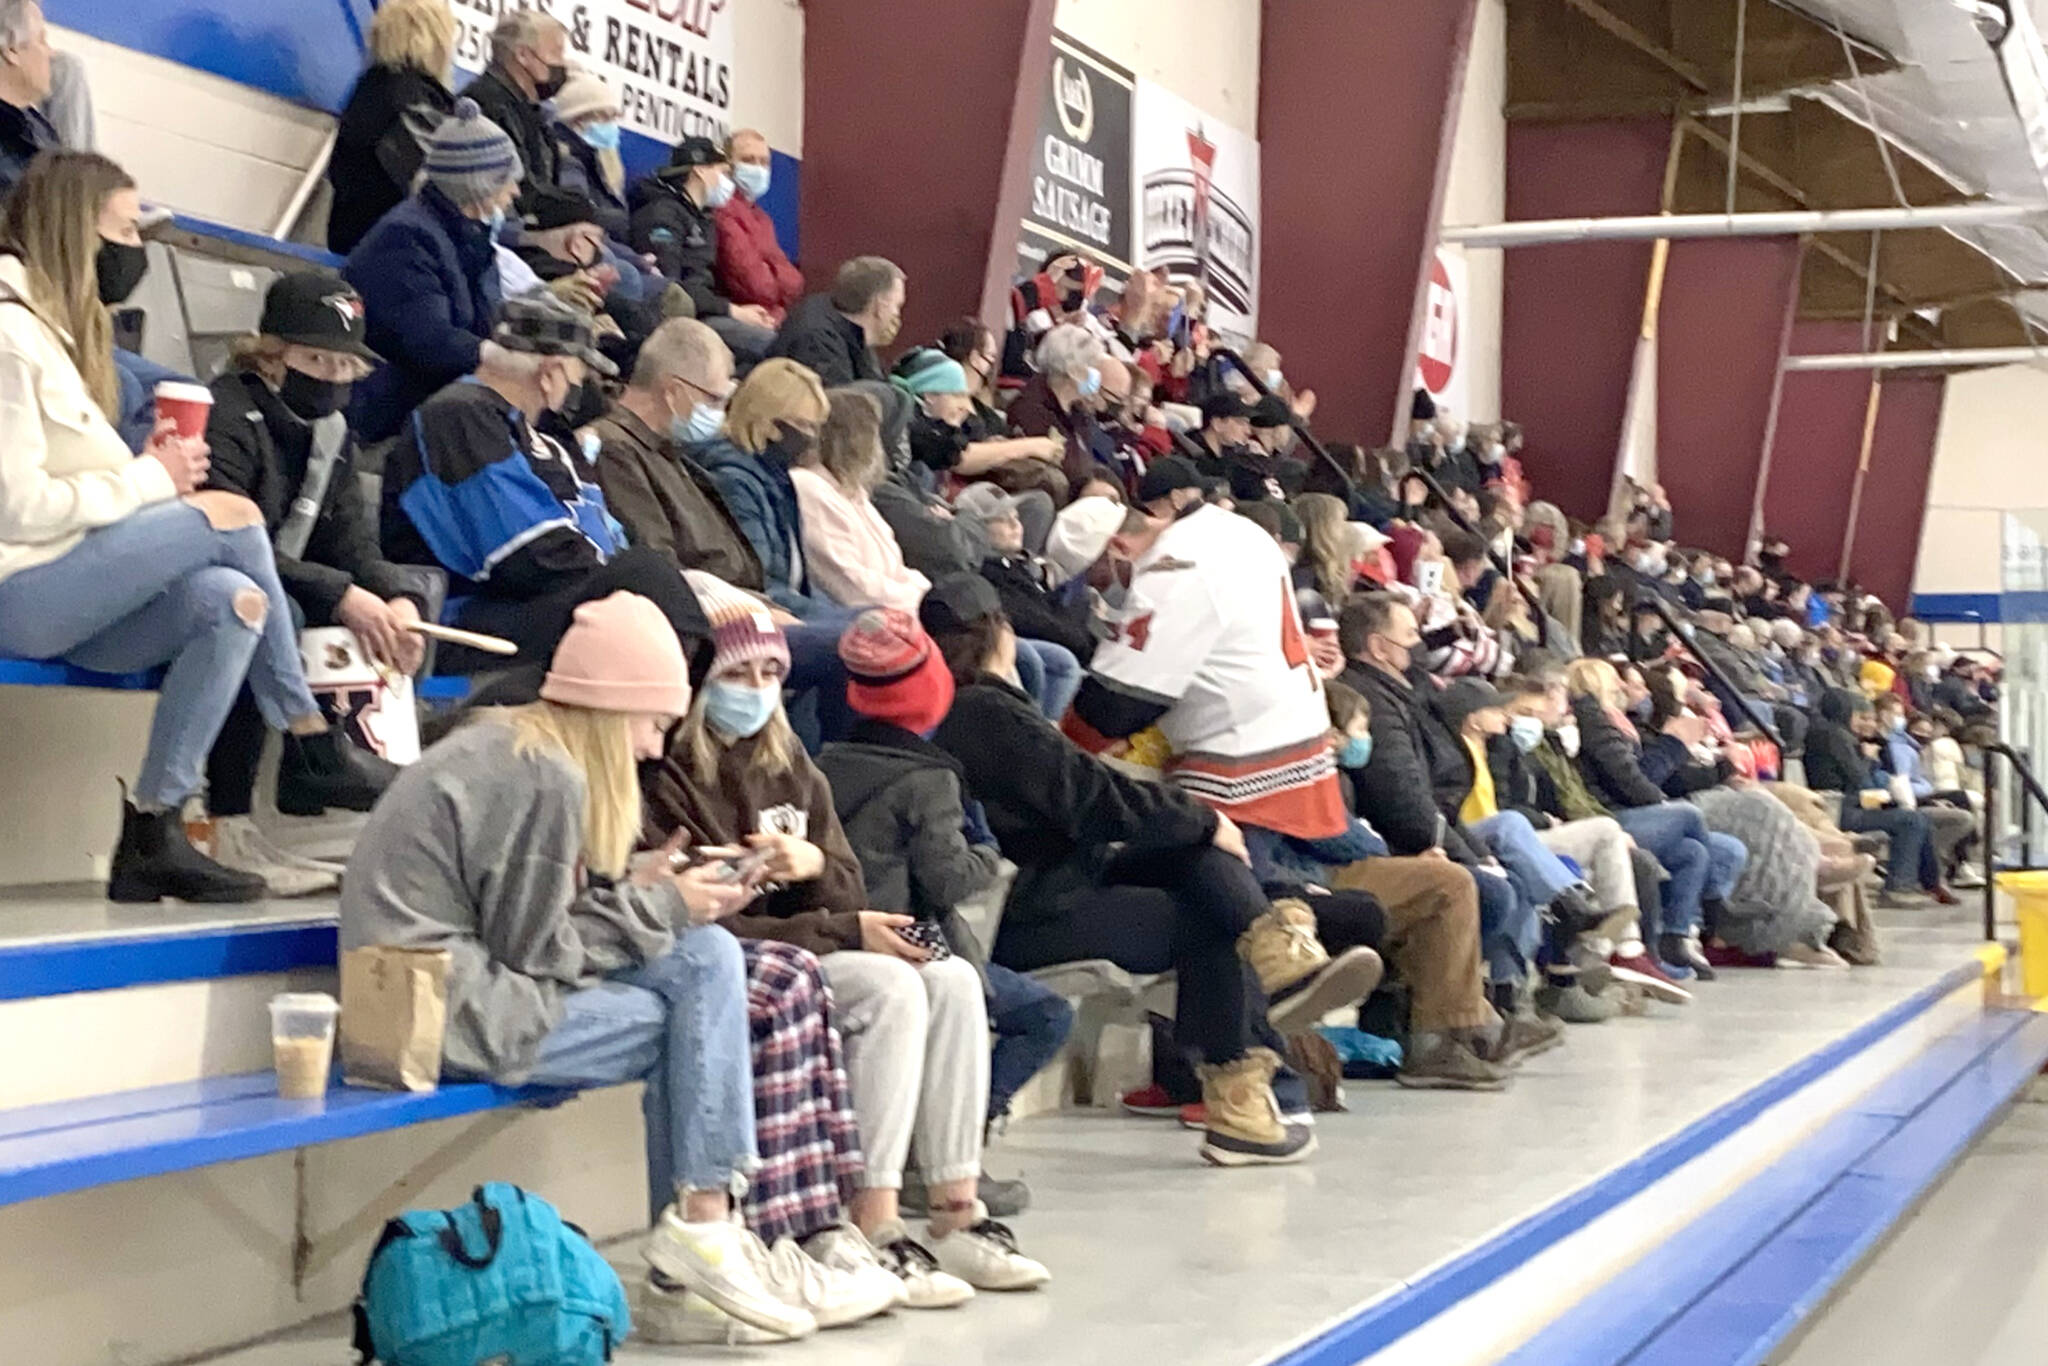 A crowd of 514 people at the Summerland Arena watched the fourth game of the playoff series between the Summerland Steam and the Kelowna Chiefs in Junior B hockey action on Saturday evening.